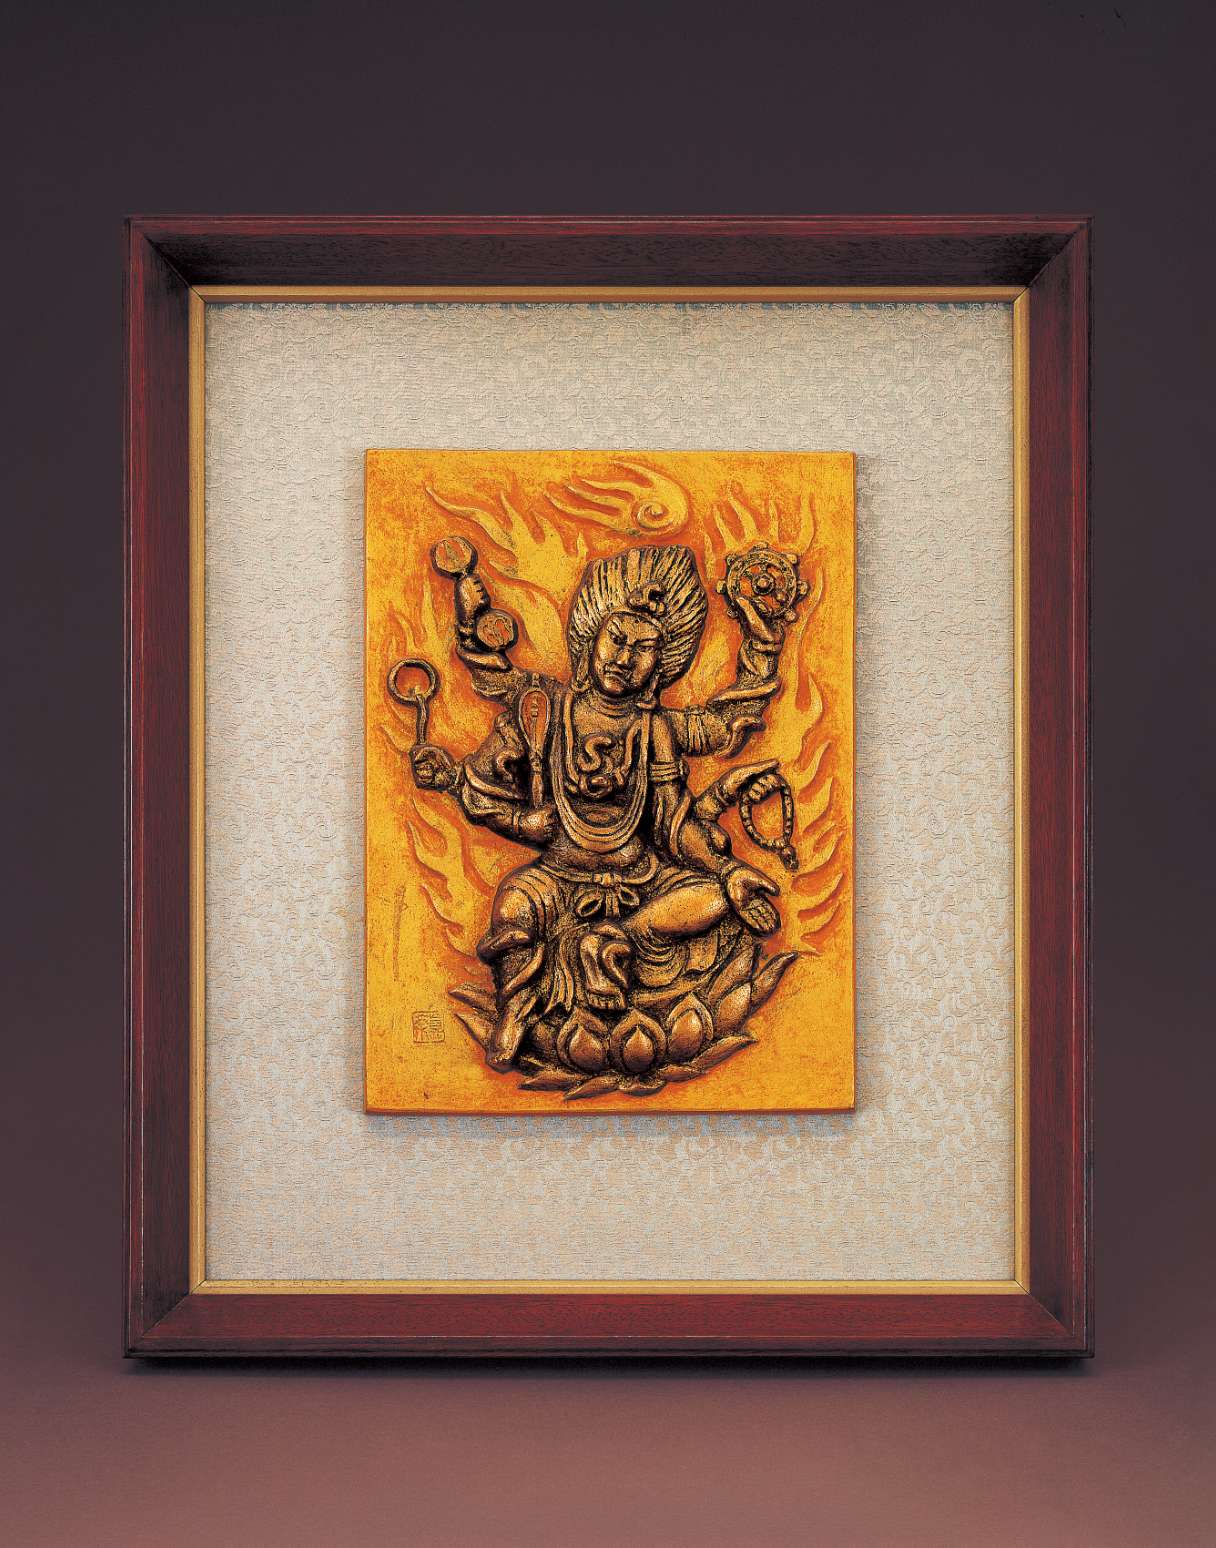 A rectangular relief of a scowling six-armed figure with wild windswept hair sitting one leg akimbo atop a lotus seat amid flames; snakes coil on each limb, and the hands wield symbolic implements.